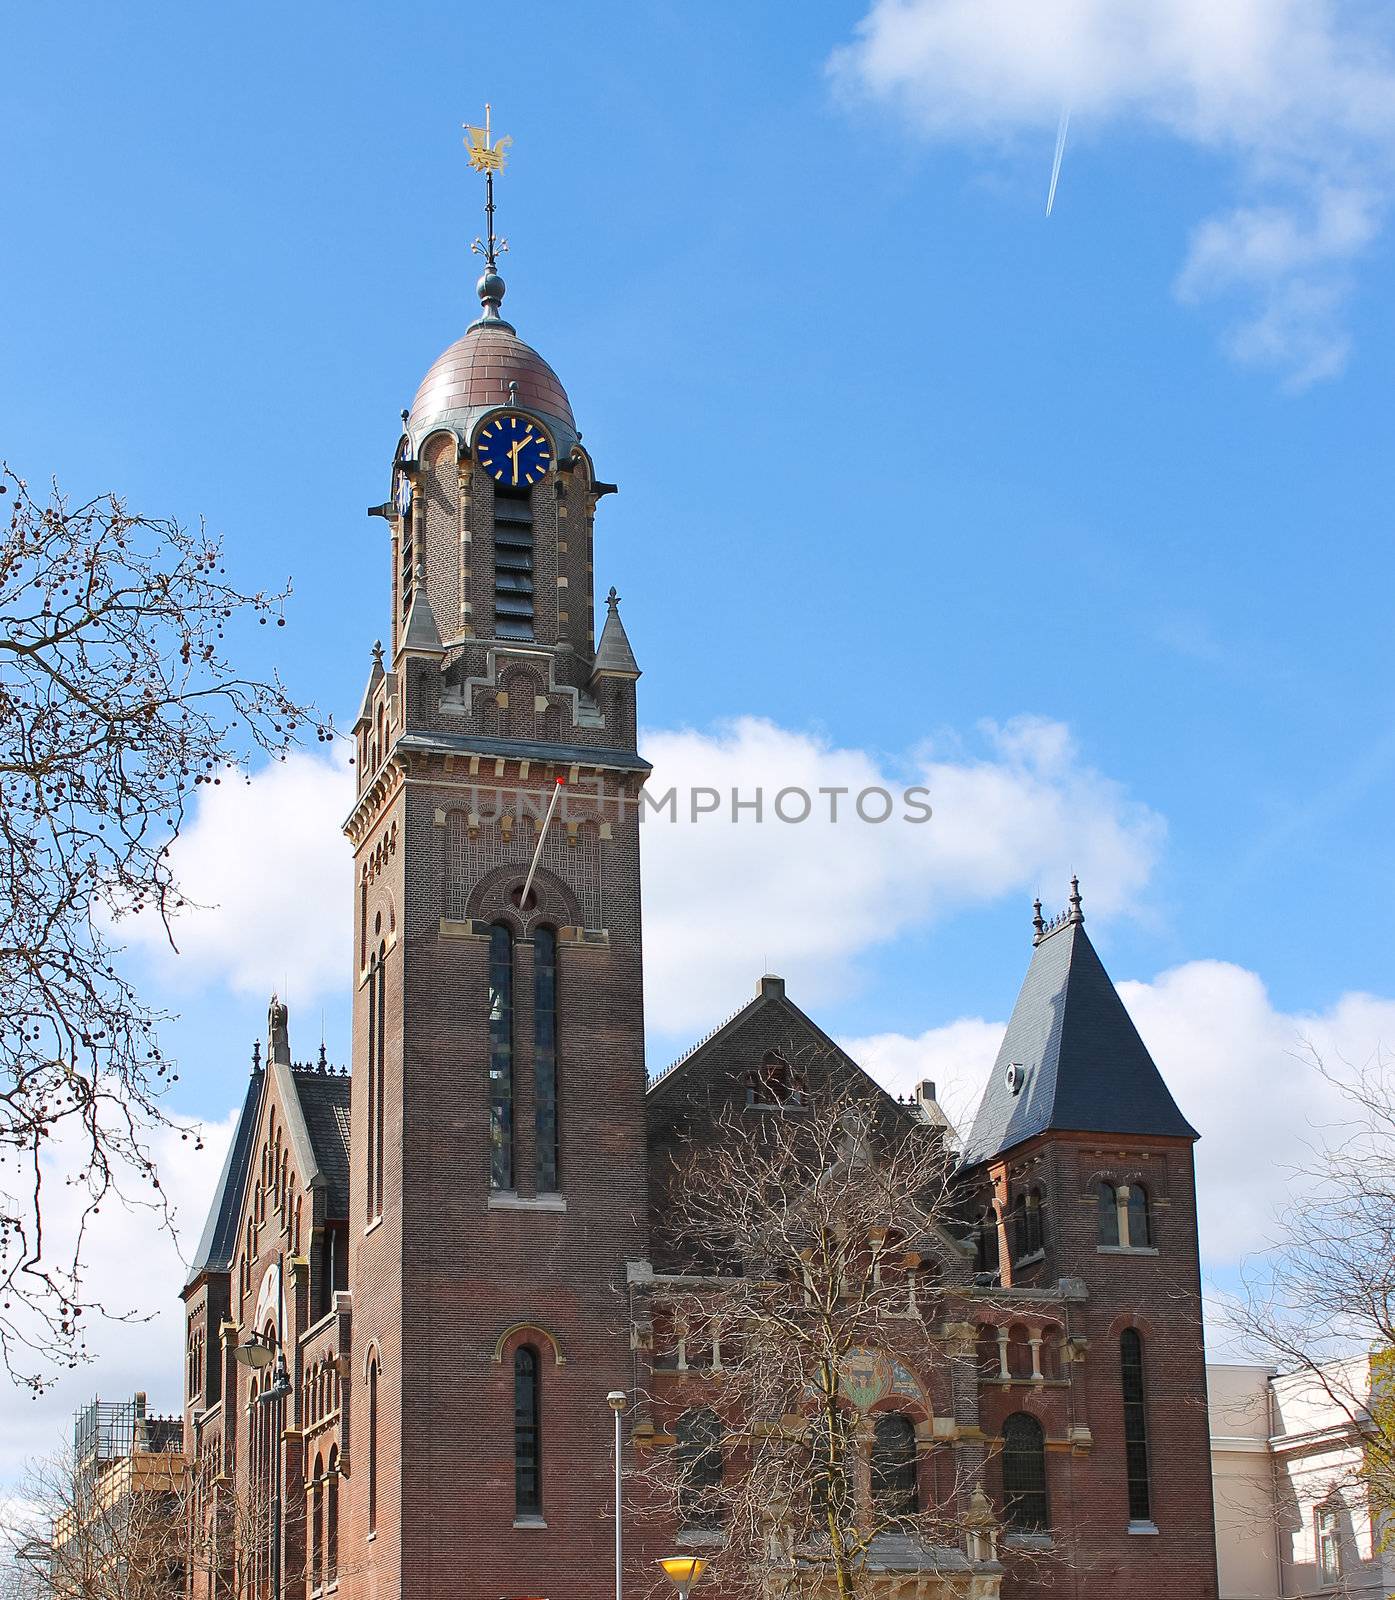 Building of Remonstrant church in Rotterdam, Netherlands by NickNick